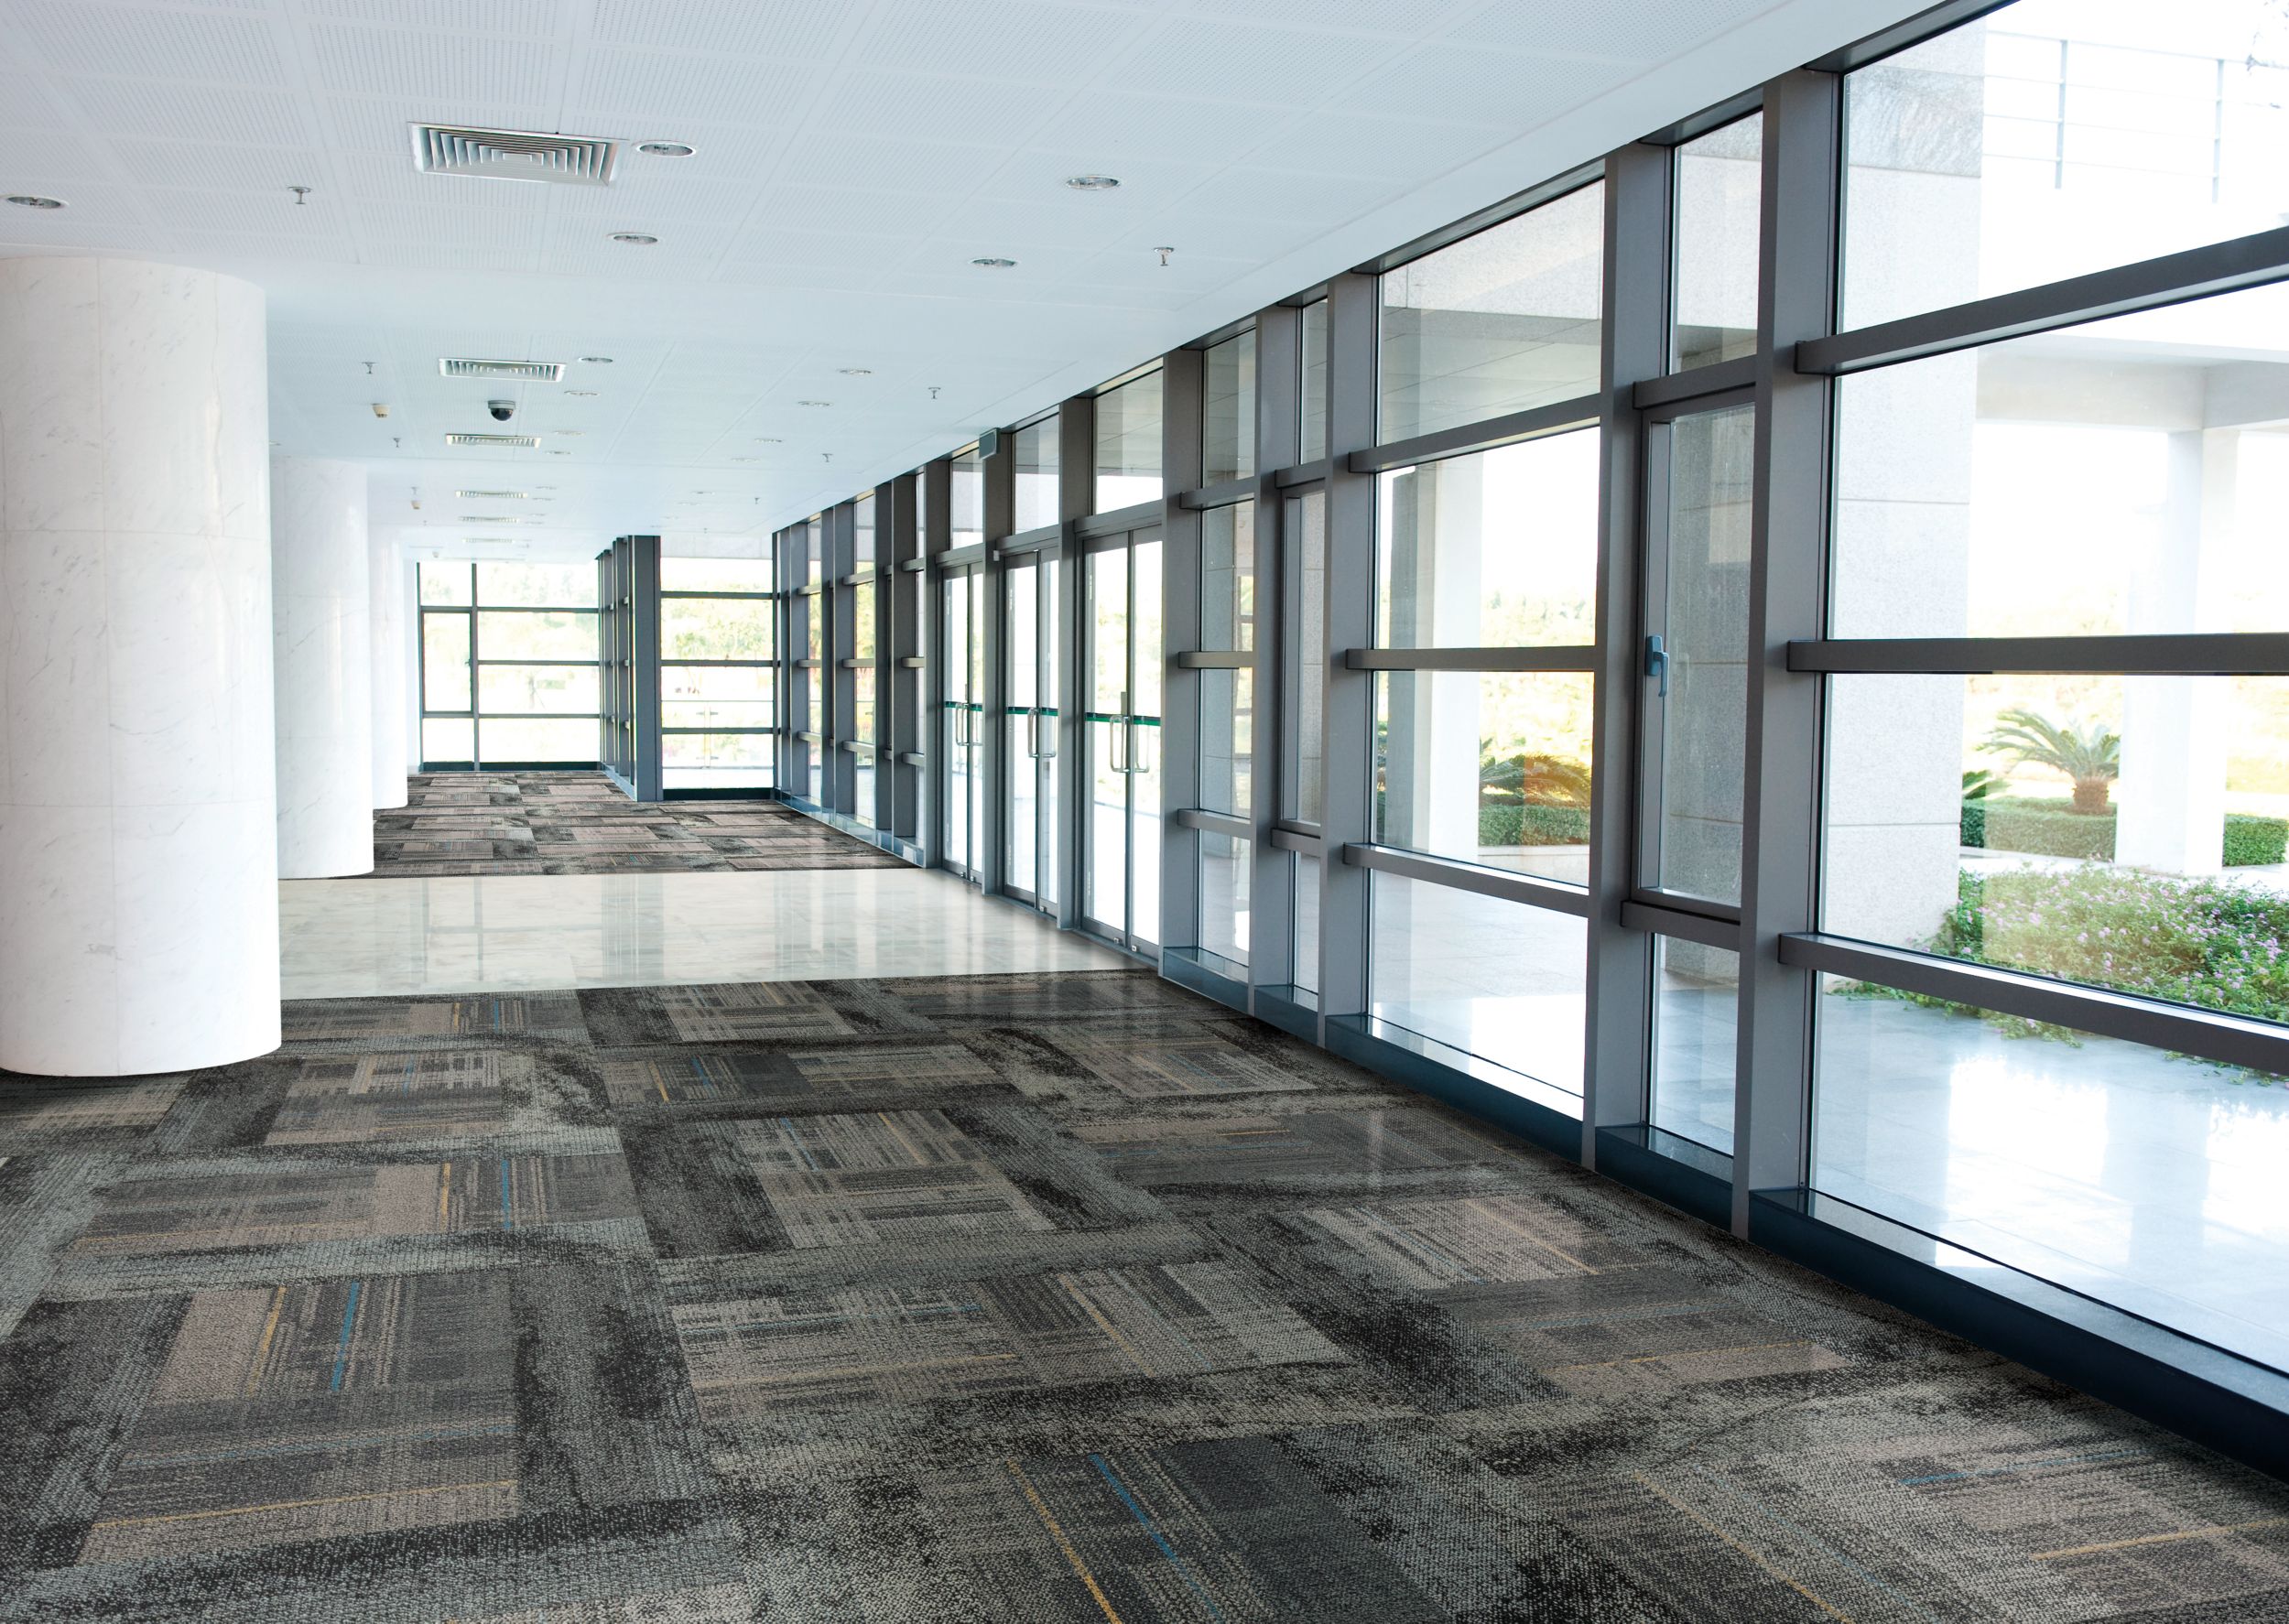 Interface AE312 carpet tile with Neighborhood Smooth plank carpet tile and Interface Textured Stones LVT in corridor with glass walls image number 9